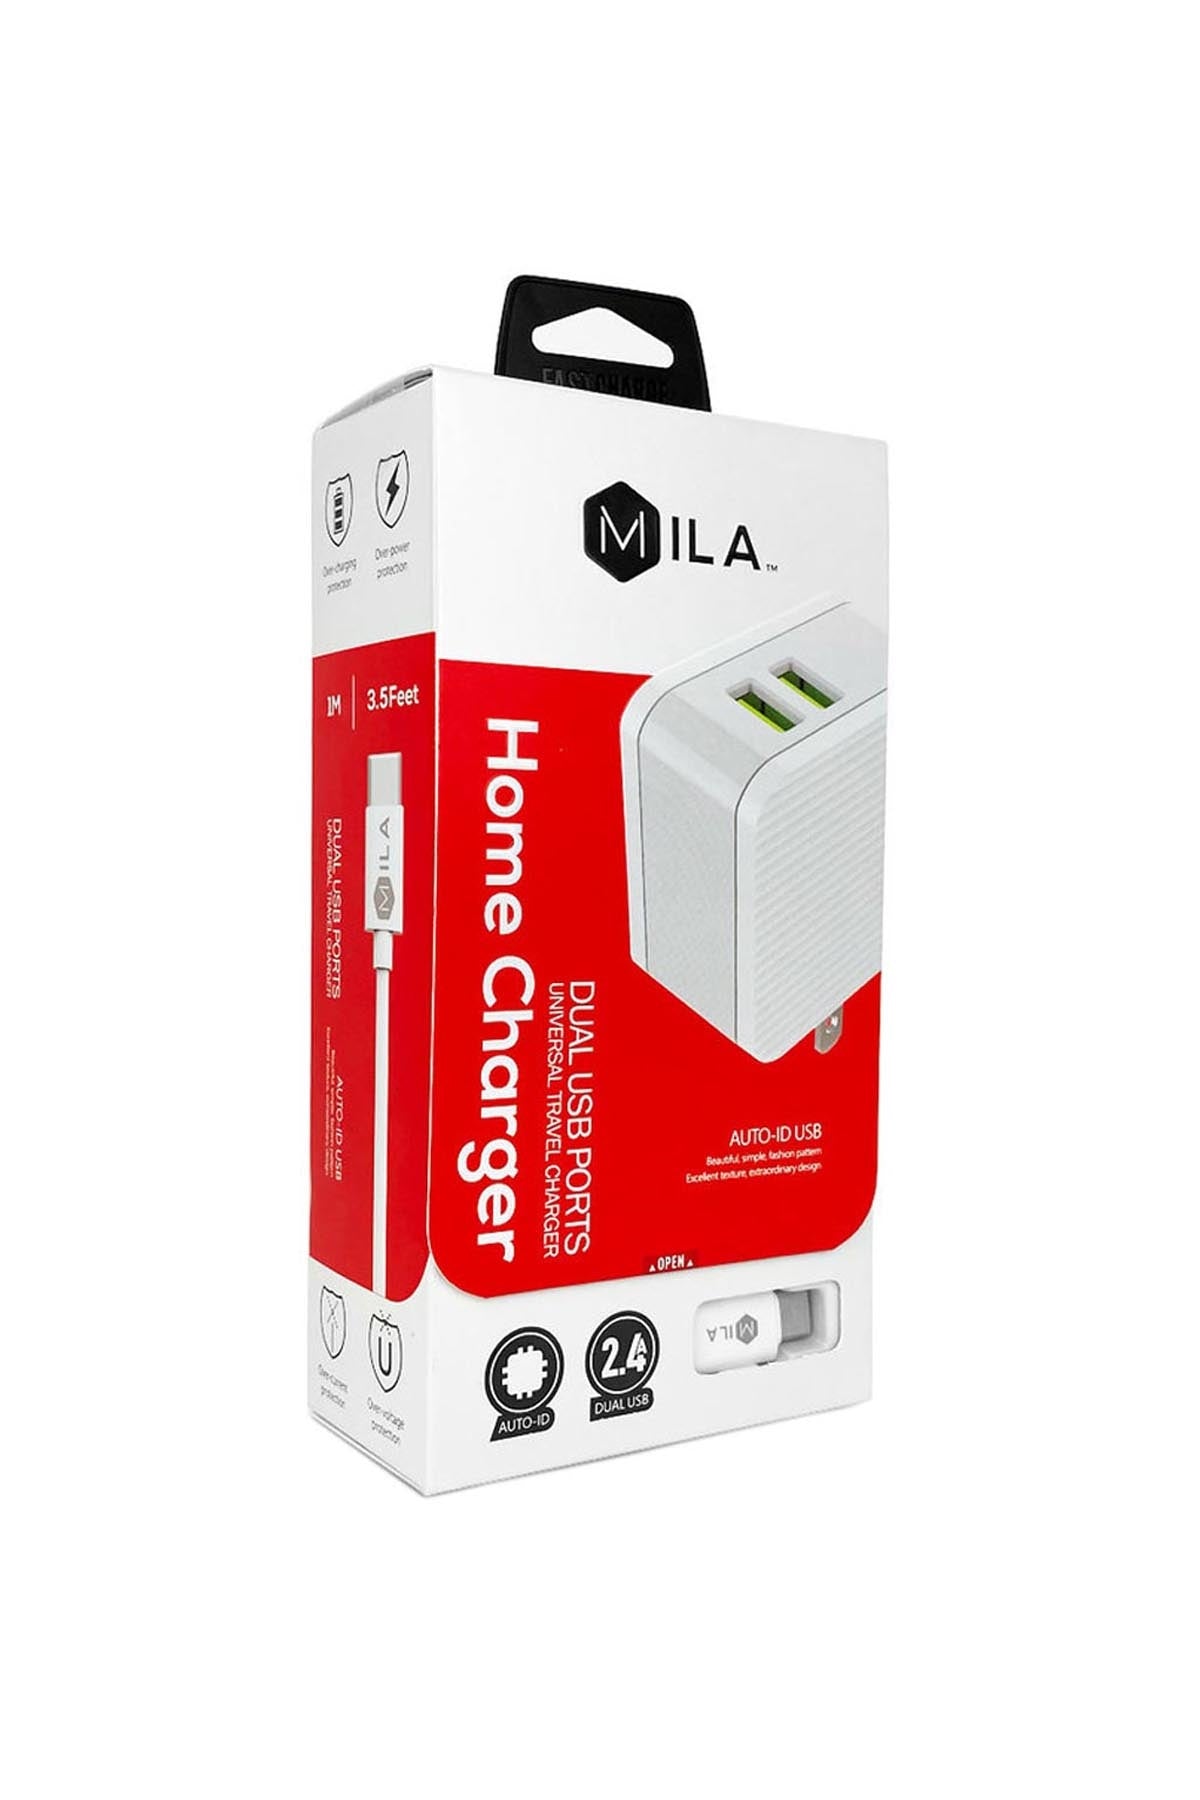 MILA /2.4A DUAL-USB HOME WALL CHARGER WITH MICRO USB CABLE V9/6PCS